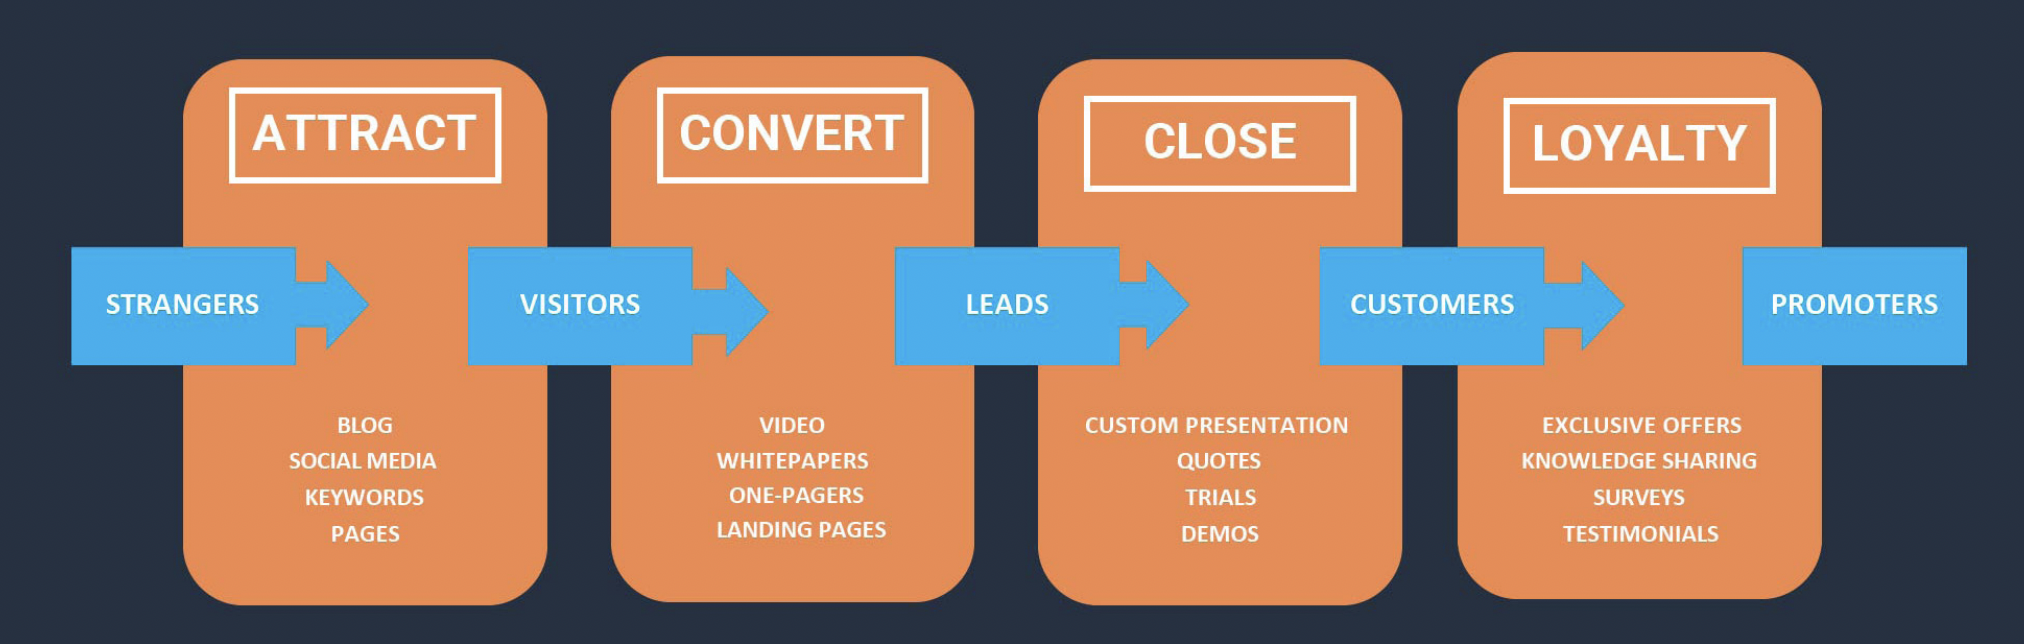 Mapping Content to the B2B Customer’s Journey